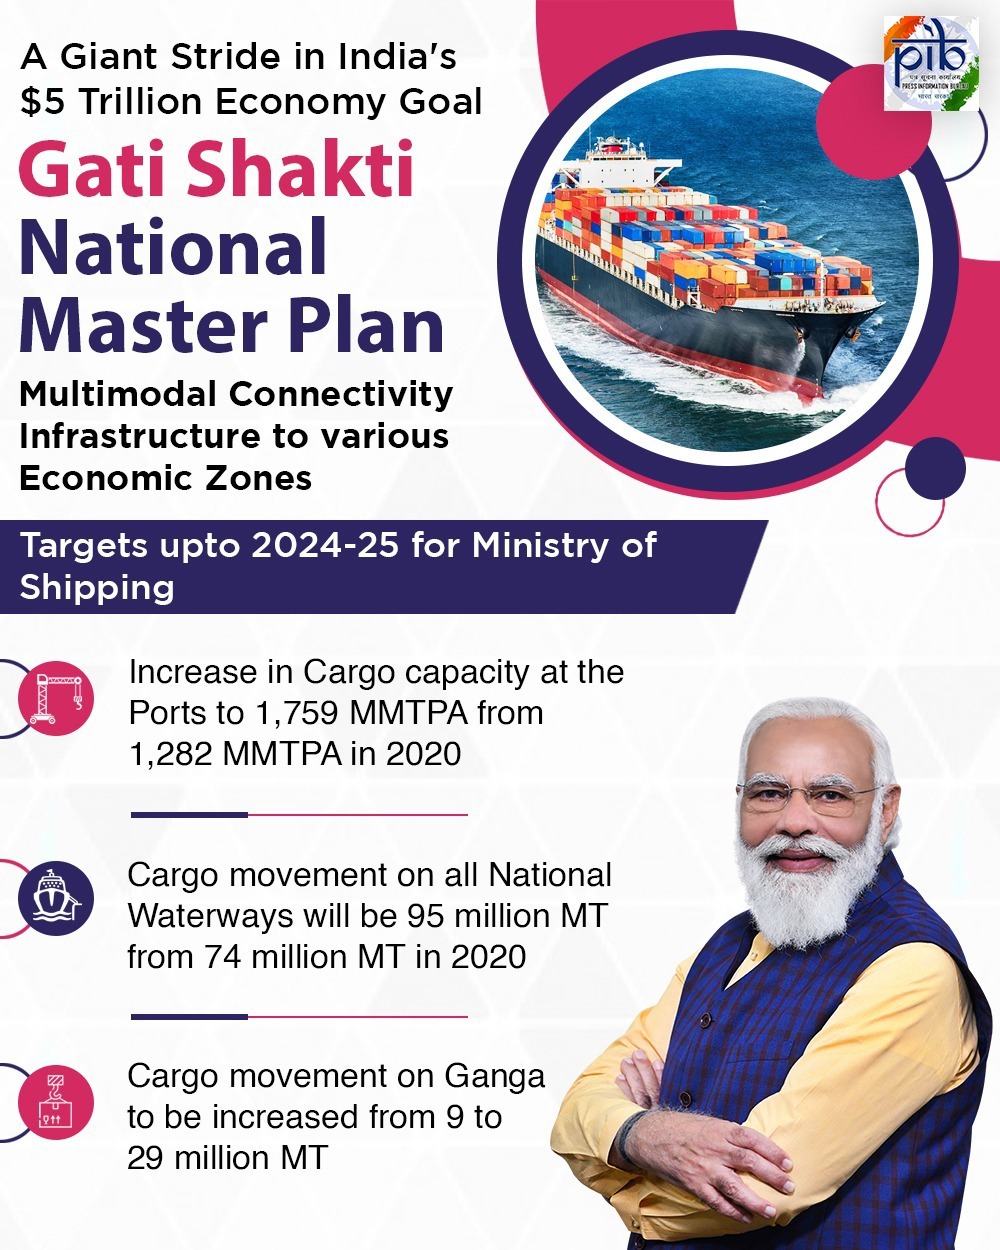 PM launches Gati Shakti- National Master Plan for infrastructure development Mumbai Port Trust takes the lead in transforming logistics sector through a slew of multi-modal connectivity projects